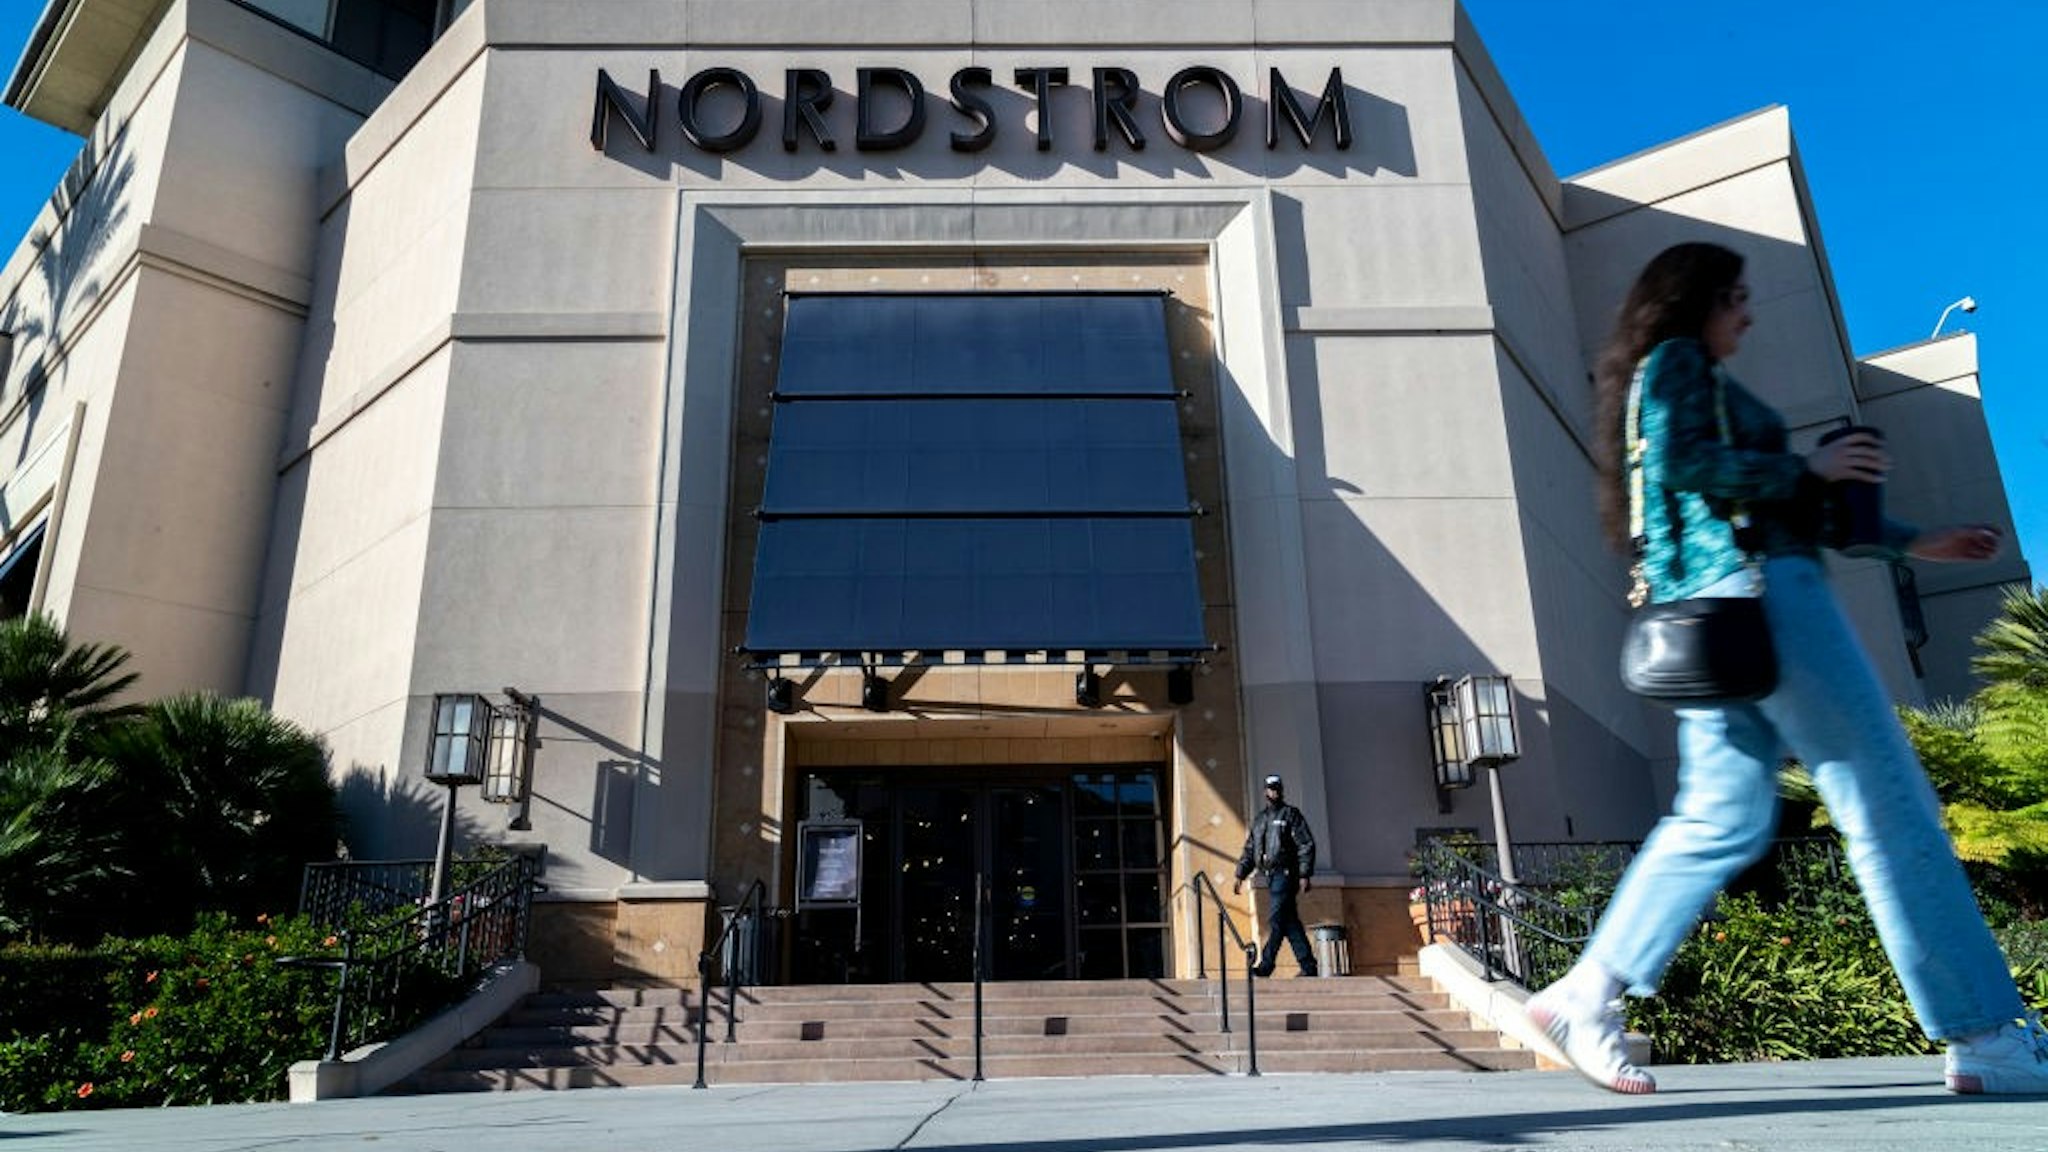 LOS ANGELES, CA - NOVEMBER 23, 2021: A security guard patrols the front entrance of Nordstrom on Tuesday after an organized group of thieves attempted a smash-and-grab robbery late Monday night at The Grove location November 23, 20201 in Los Angeles, California.